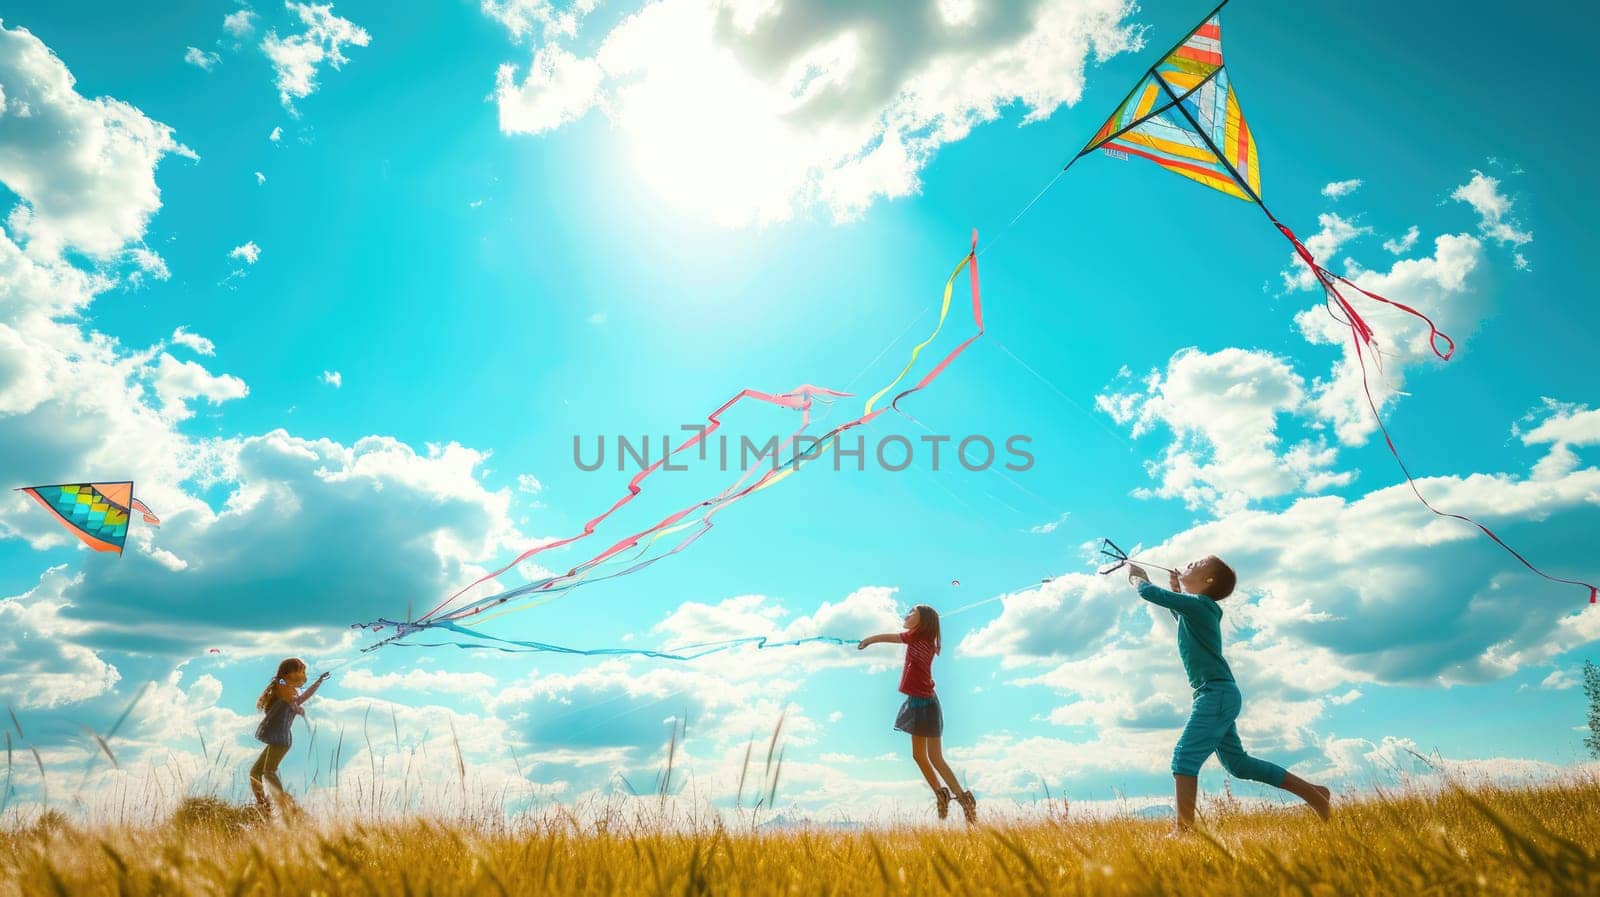 Kite flying in blue sky, cloud-filled atmosphere, over natural landscape AIG41 by biancoblue